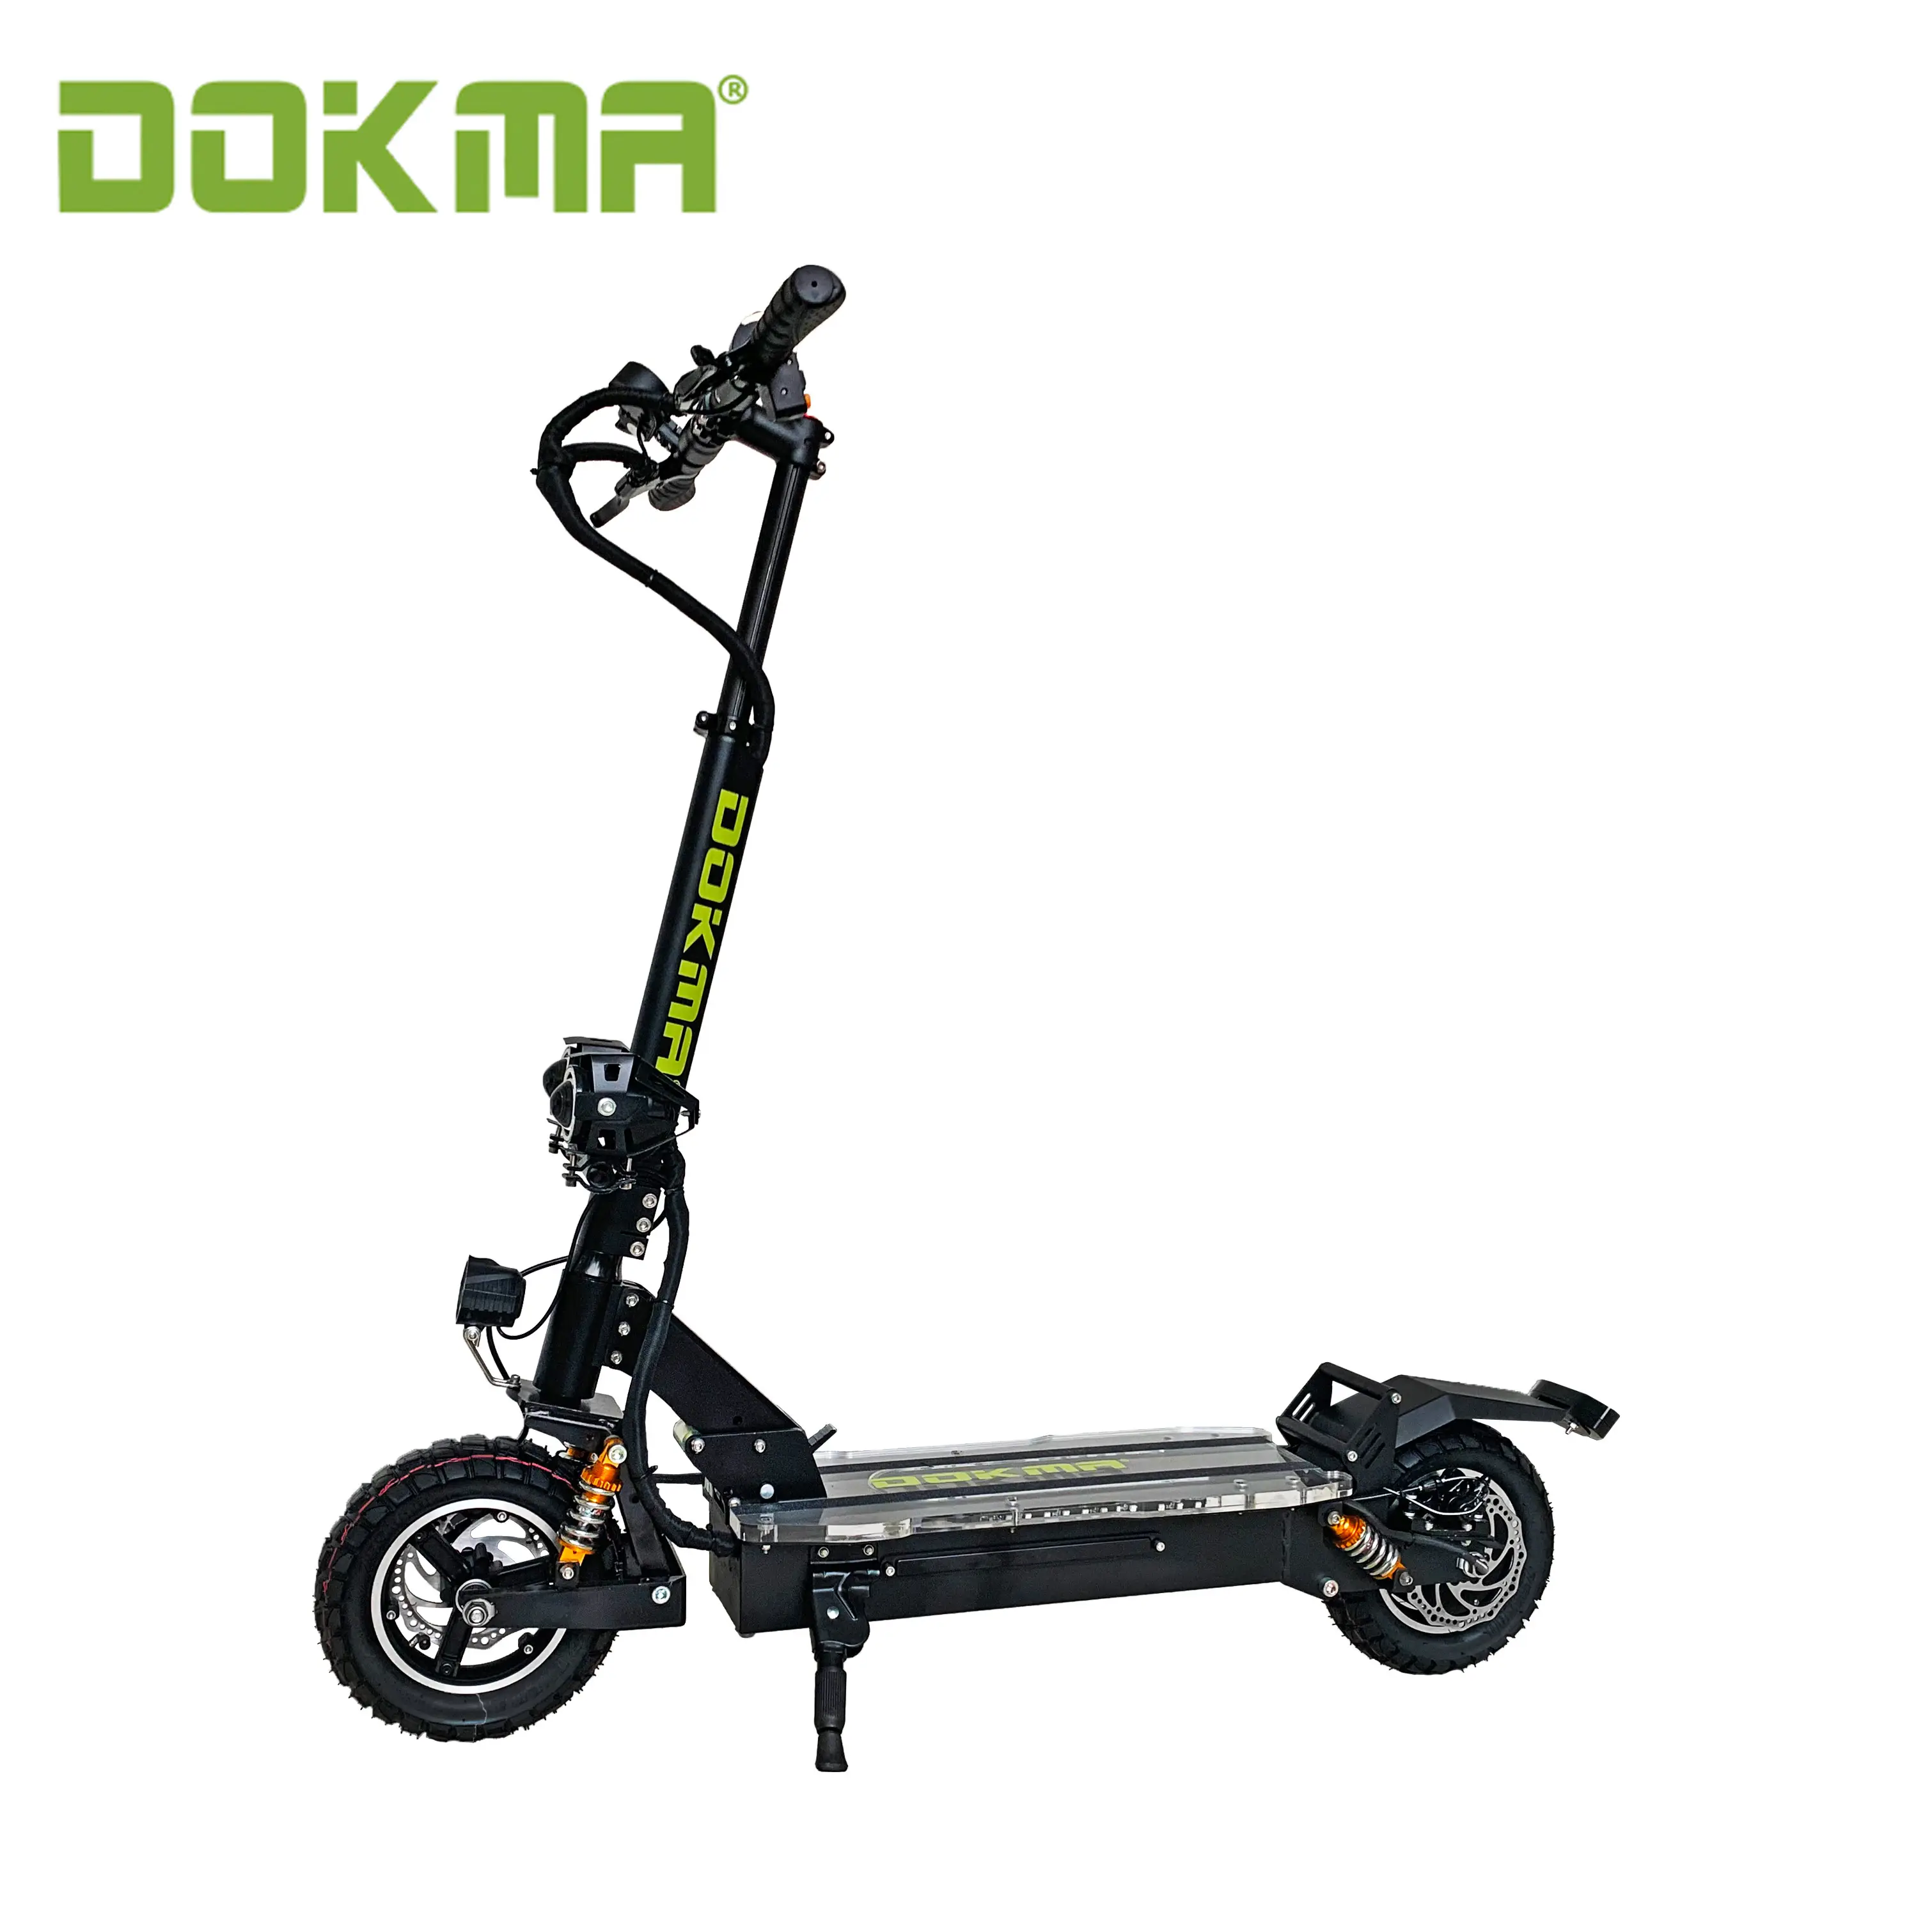 Dokma 1200w/2400w 48v Folding Sport City scooter Hot sale model Off road Electric scooter with Pedal